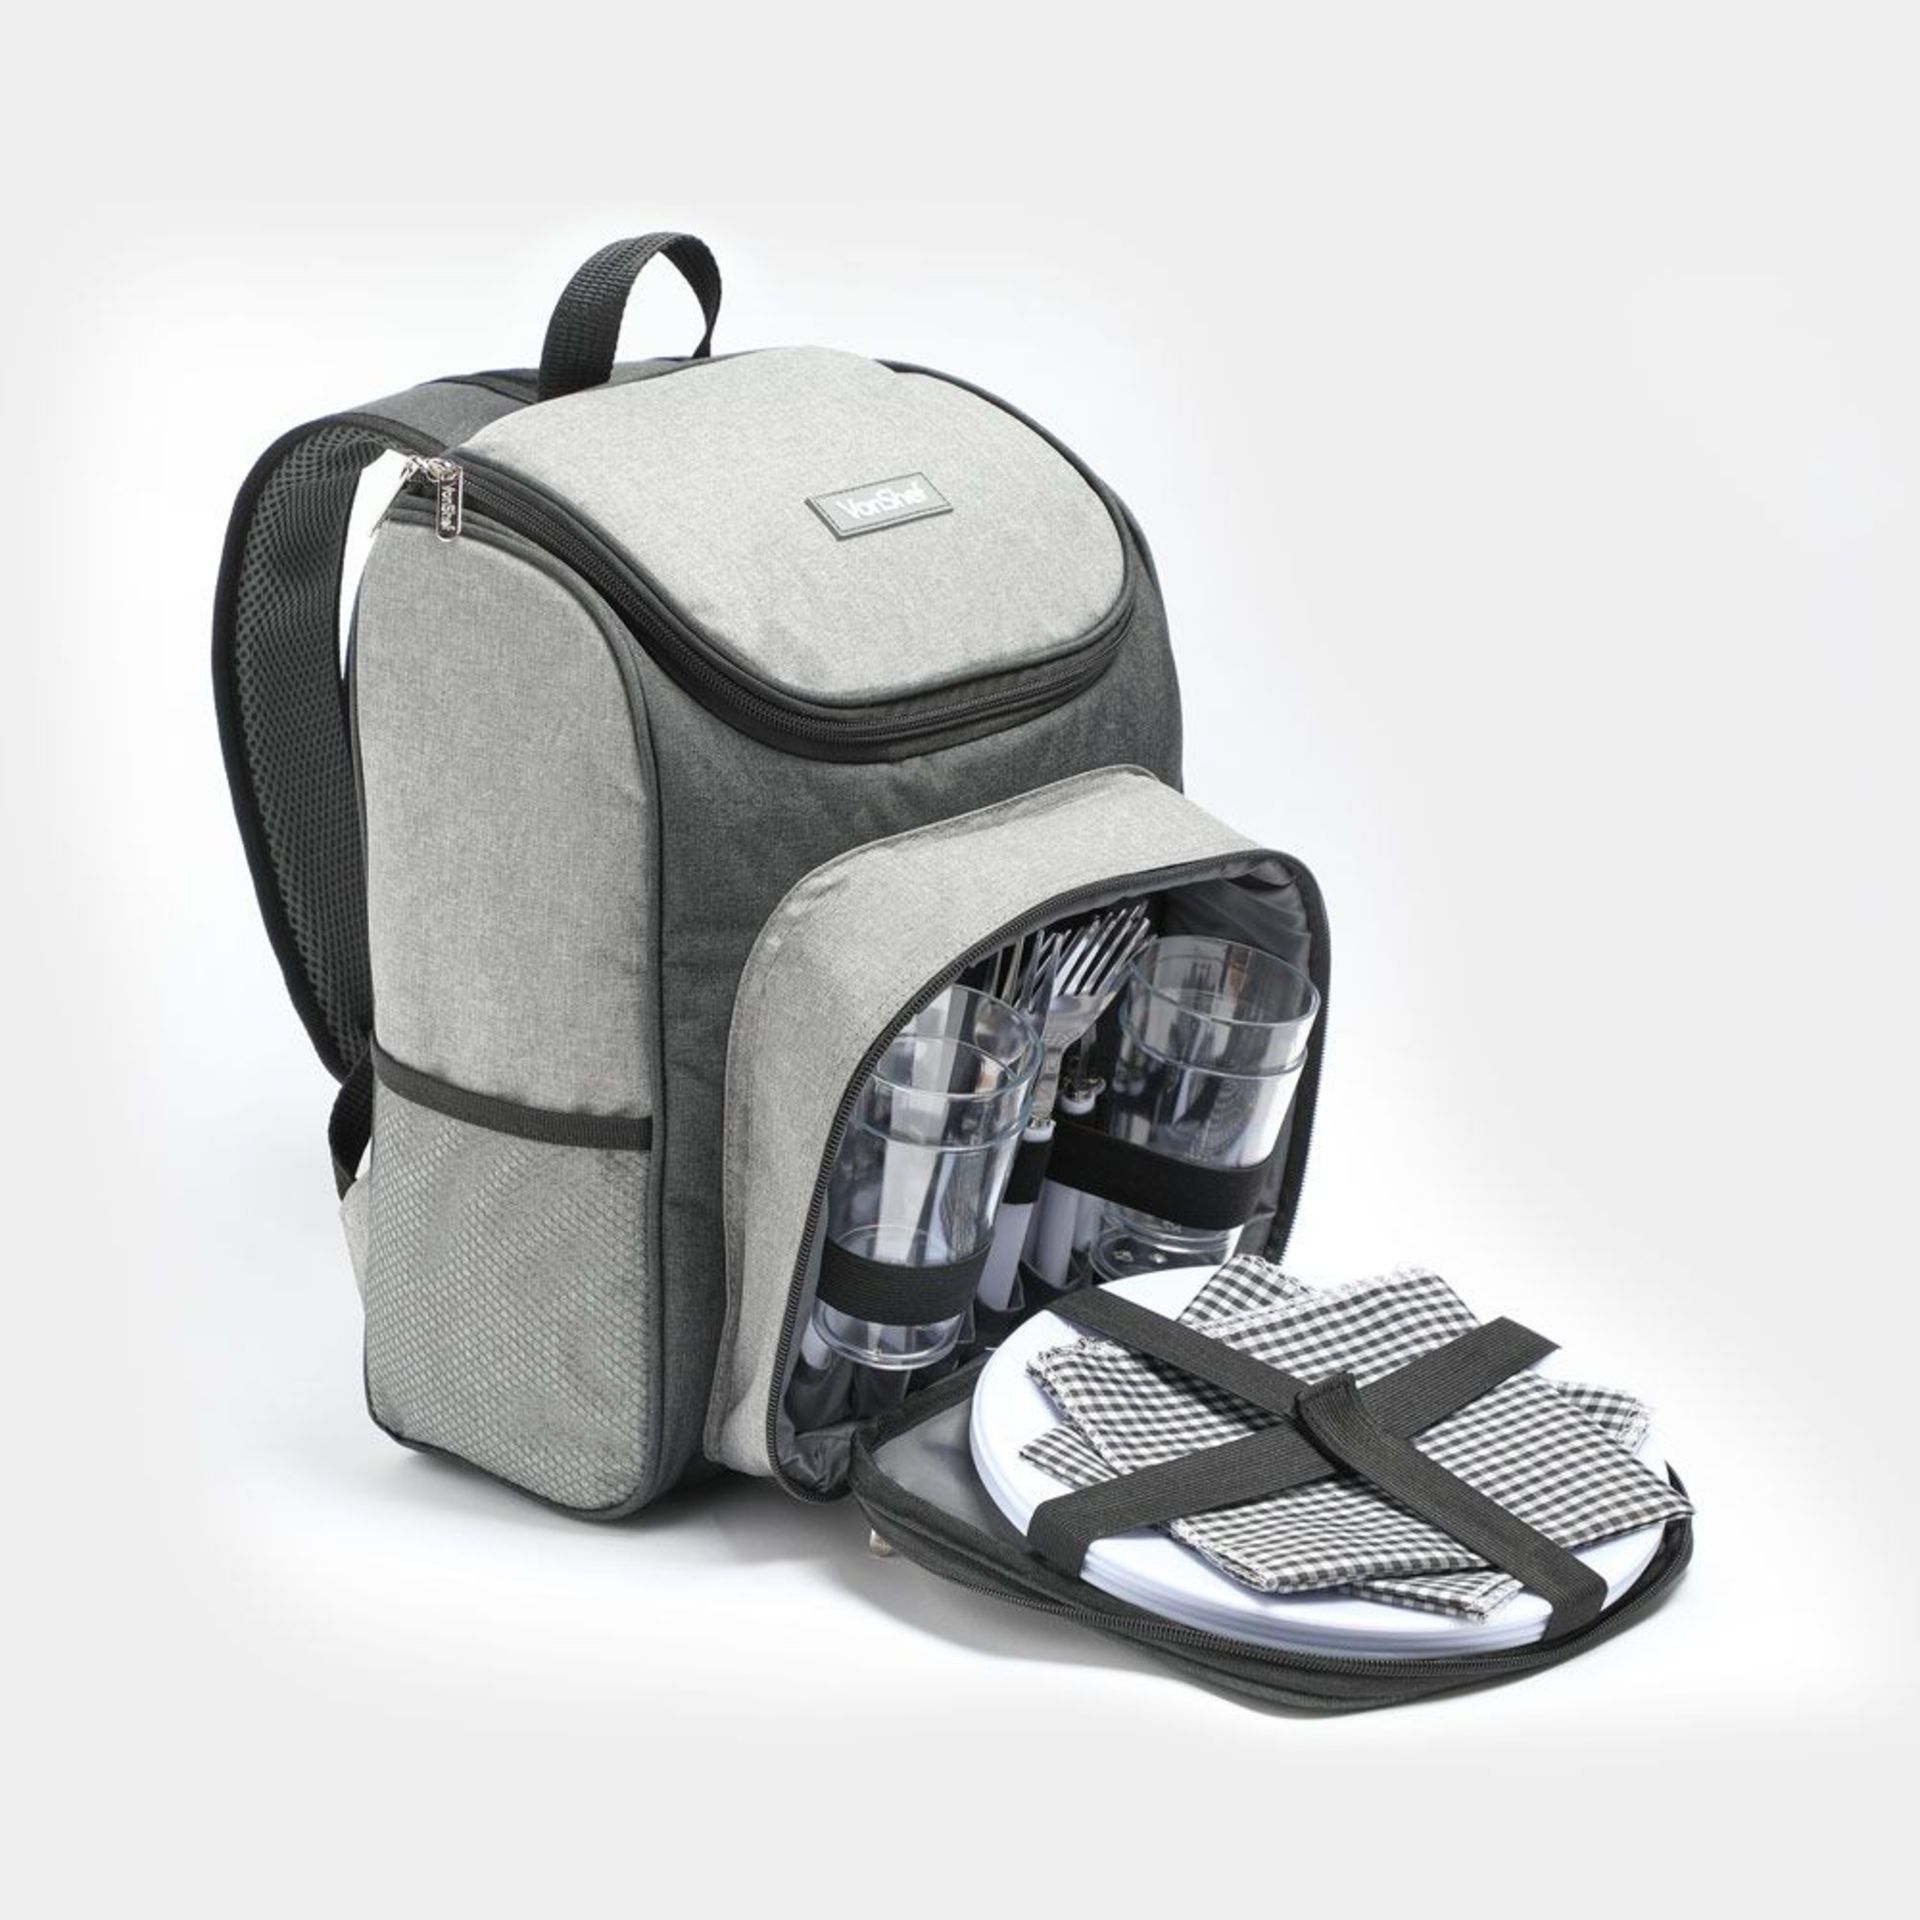 Picnic backpack - 4 Person. -R8. Get out and soak up the sun with the help of our 4-person picnic